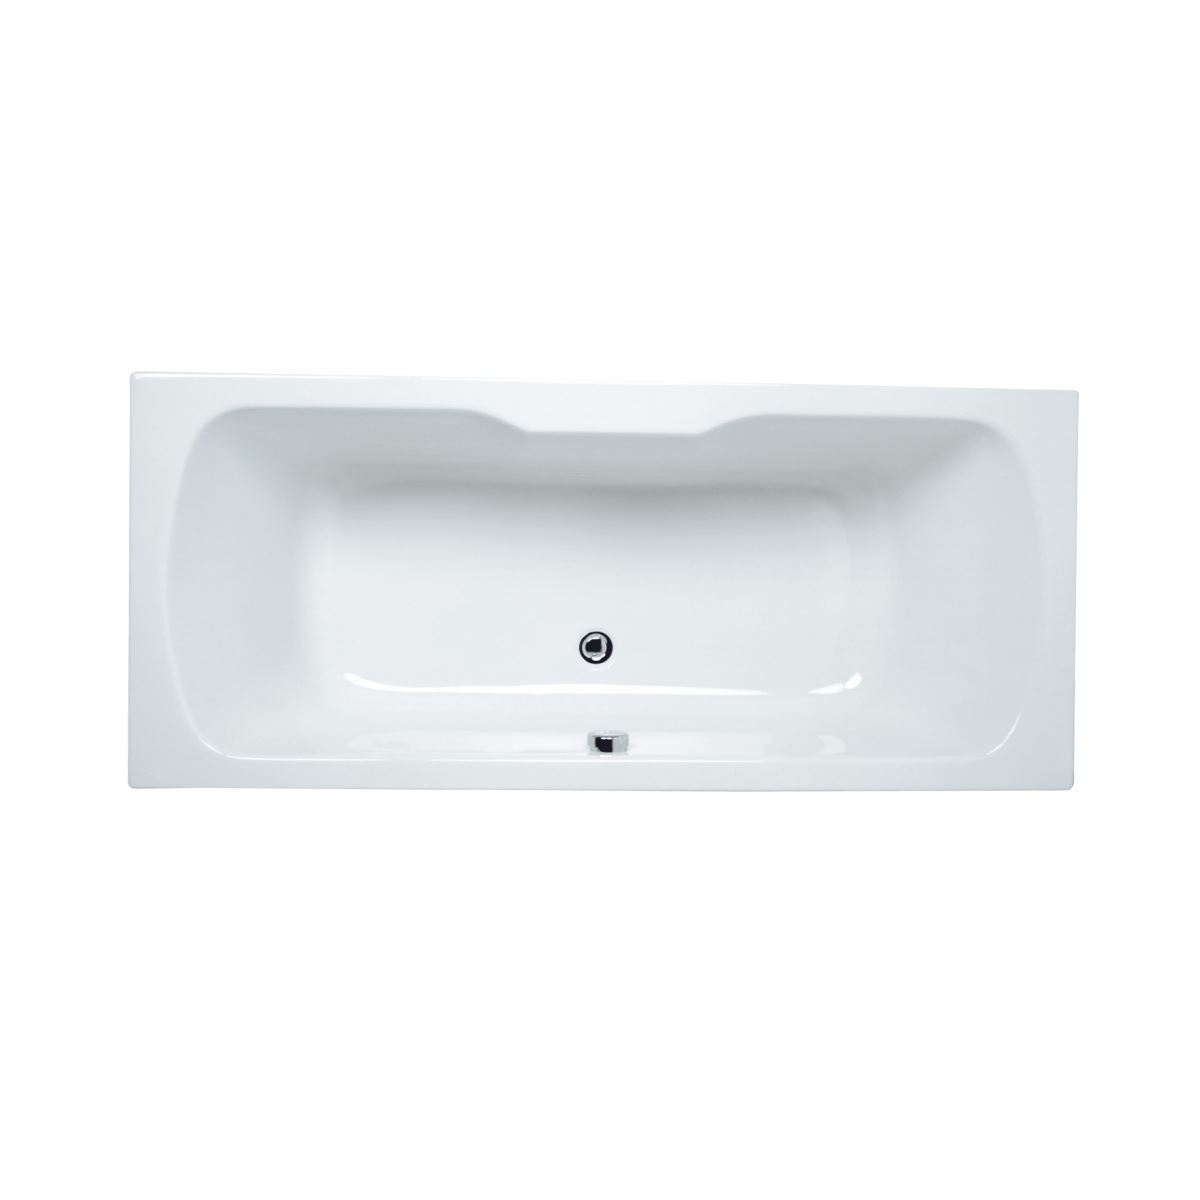 VitrA Optima Double Ended Bath 1700 x 750mm [52430001000] [BATH ONLY - PANELS AND LEG SET NOT INCLUDED]